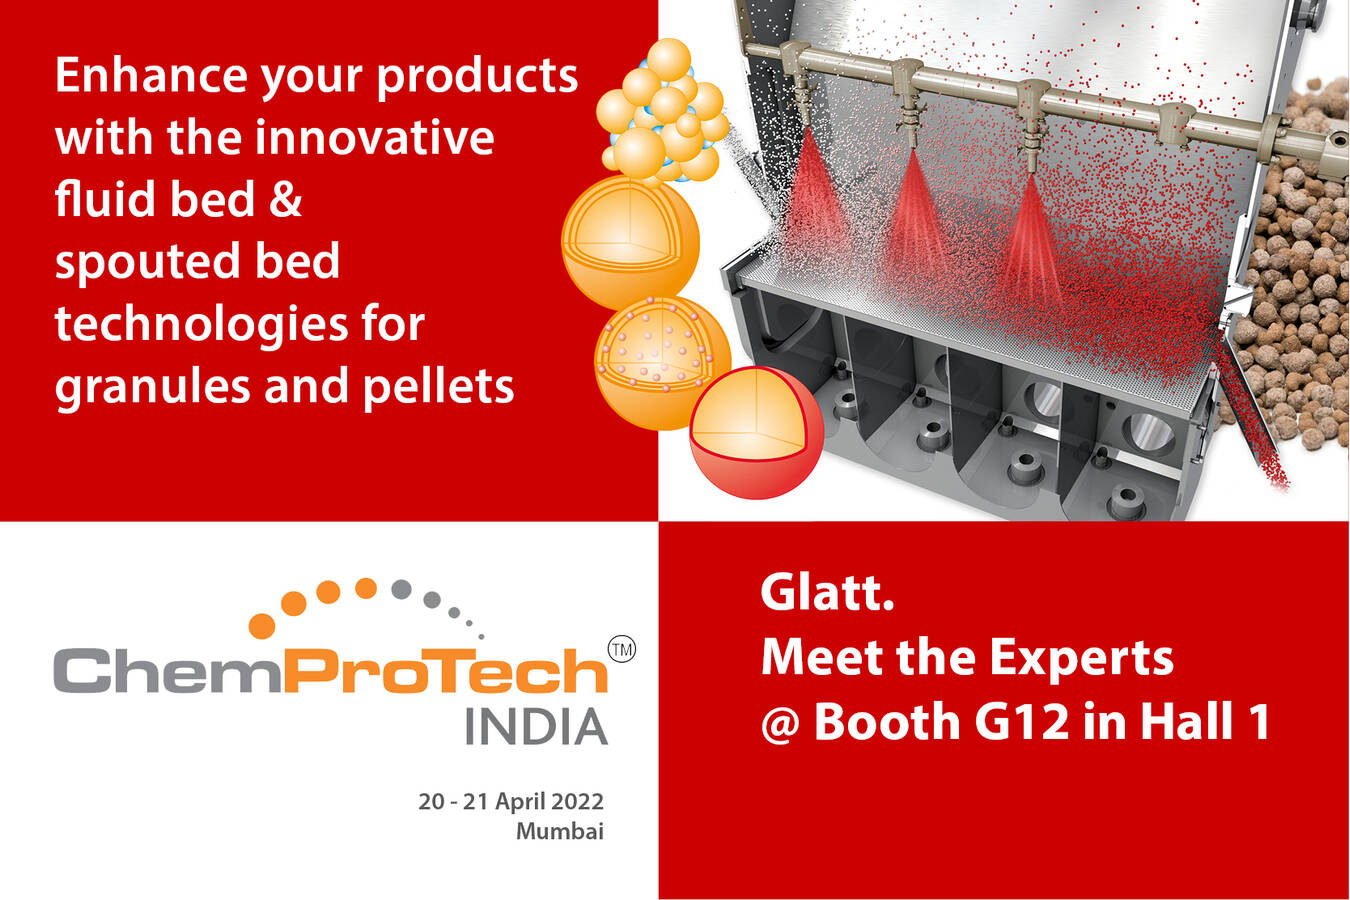 Meet the Glatt experts at ChemProTech India Free-flowing granules and pellets from liquids and powders using innovative fluid bed and spouted bed technology